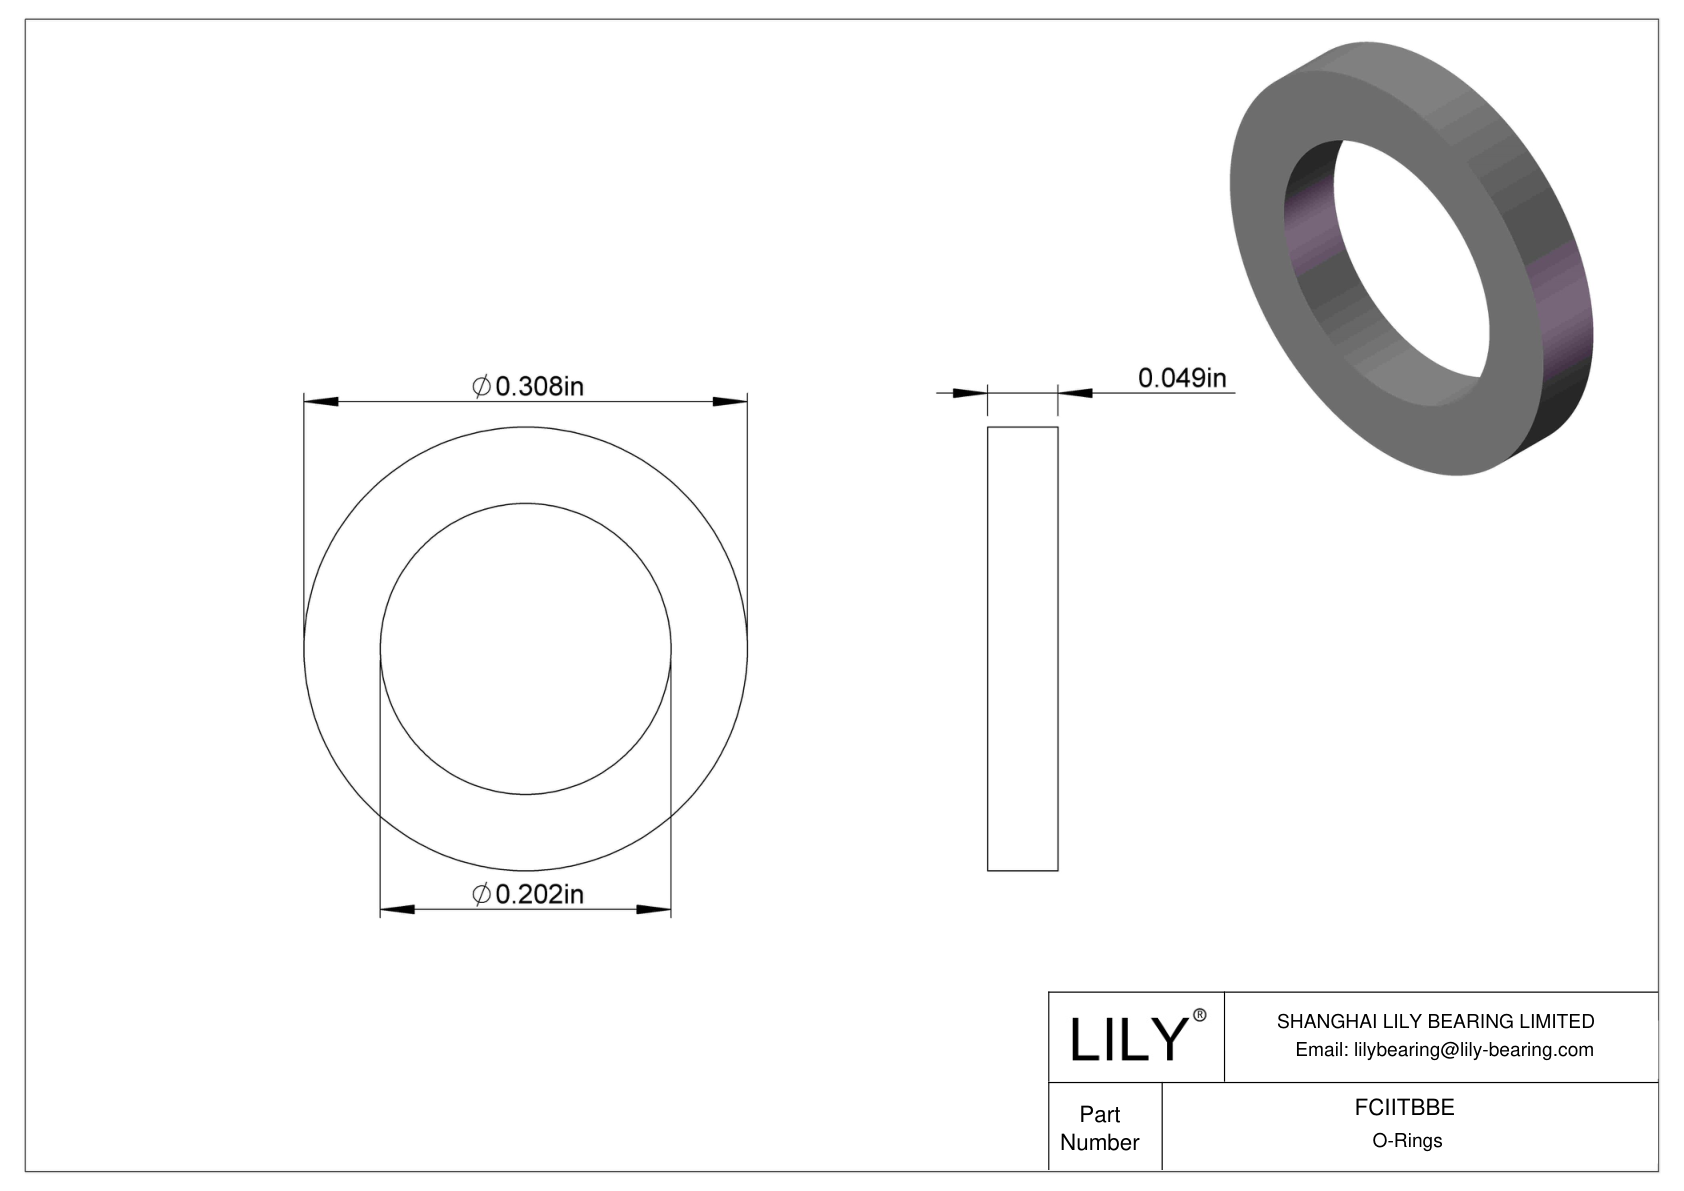 FCIITBBE O-Ring Backup Rings cad drawing